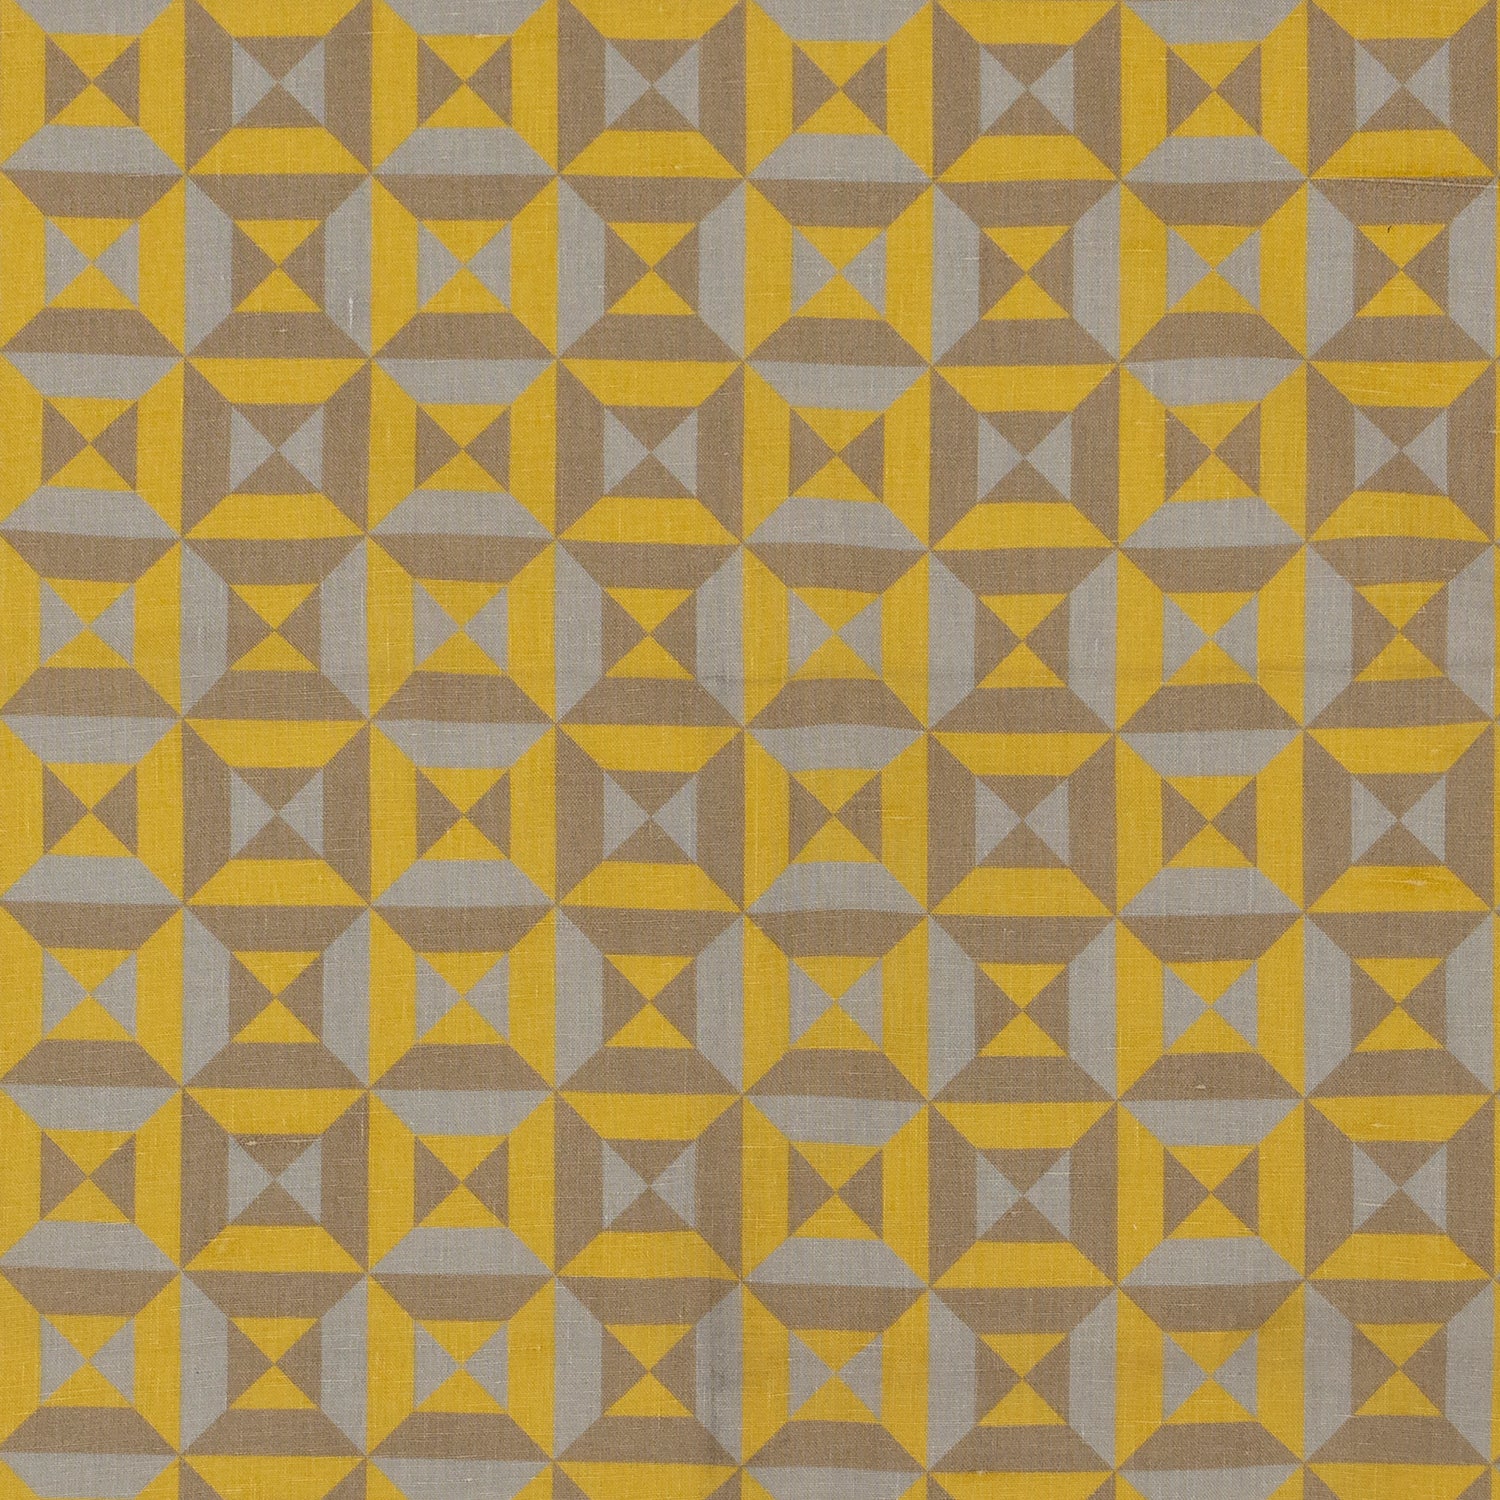 Fabric in a geometric grid print in mustard, gray and brown.